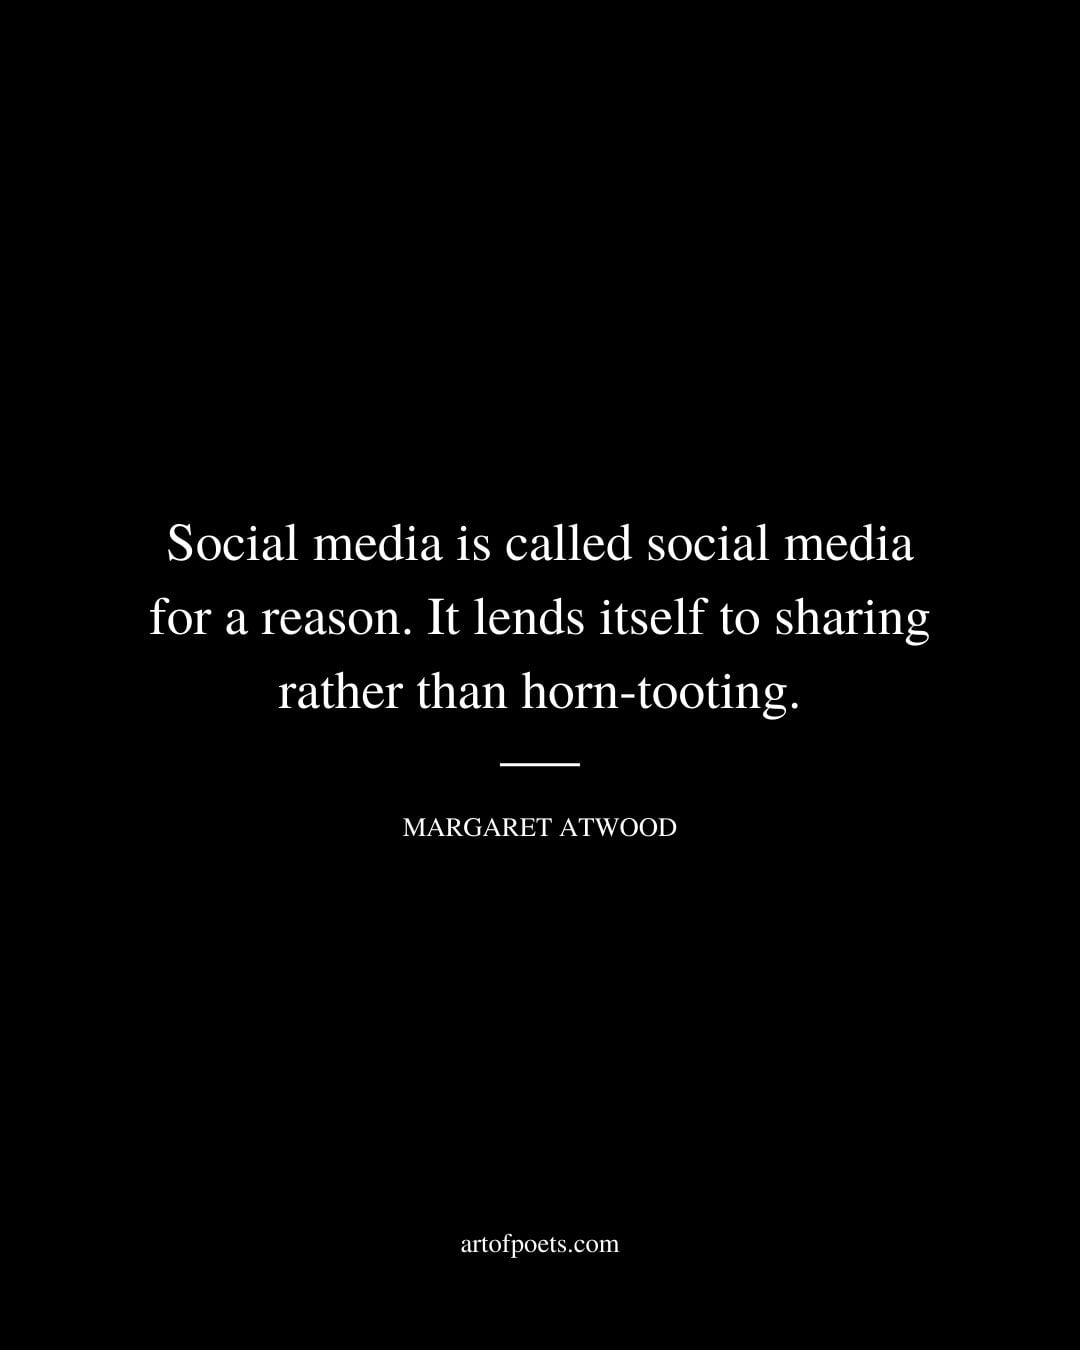 Social media is called social media for a reason. It lends itself to sharing rather than horn tooting